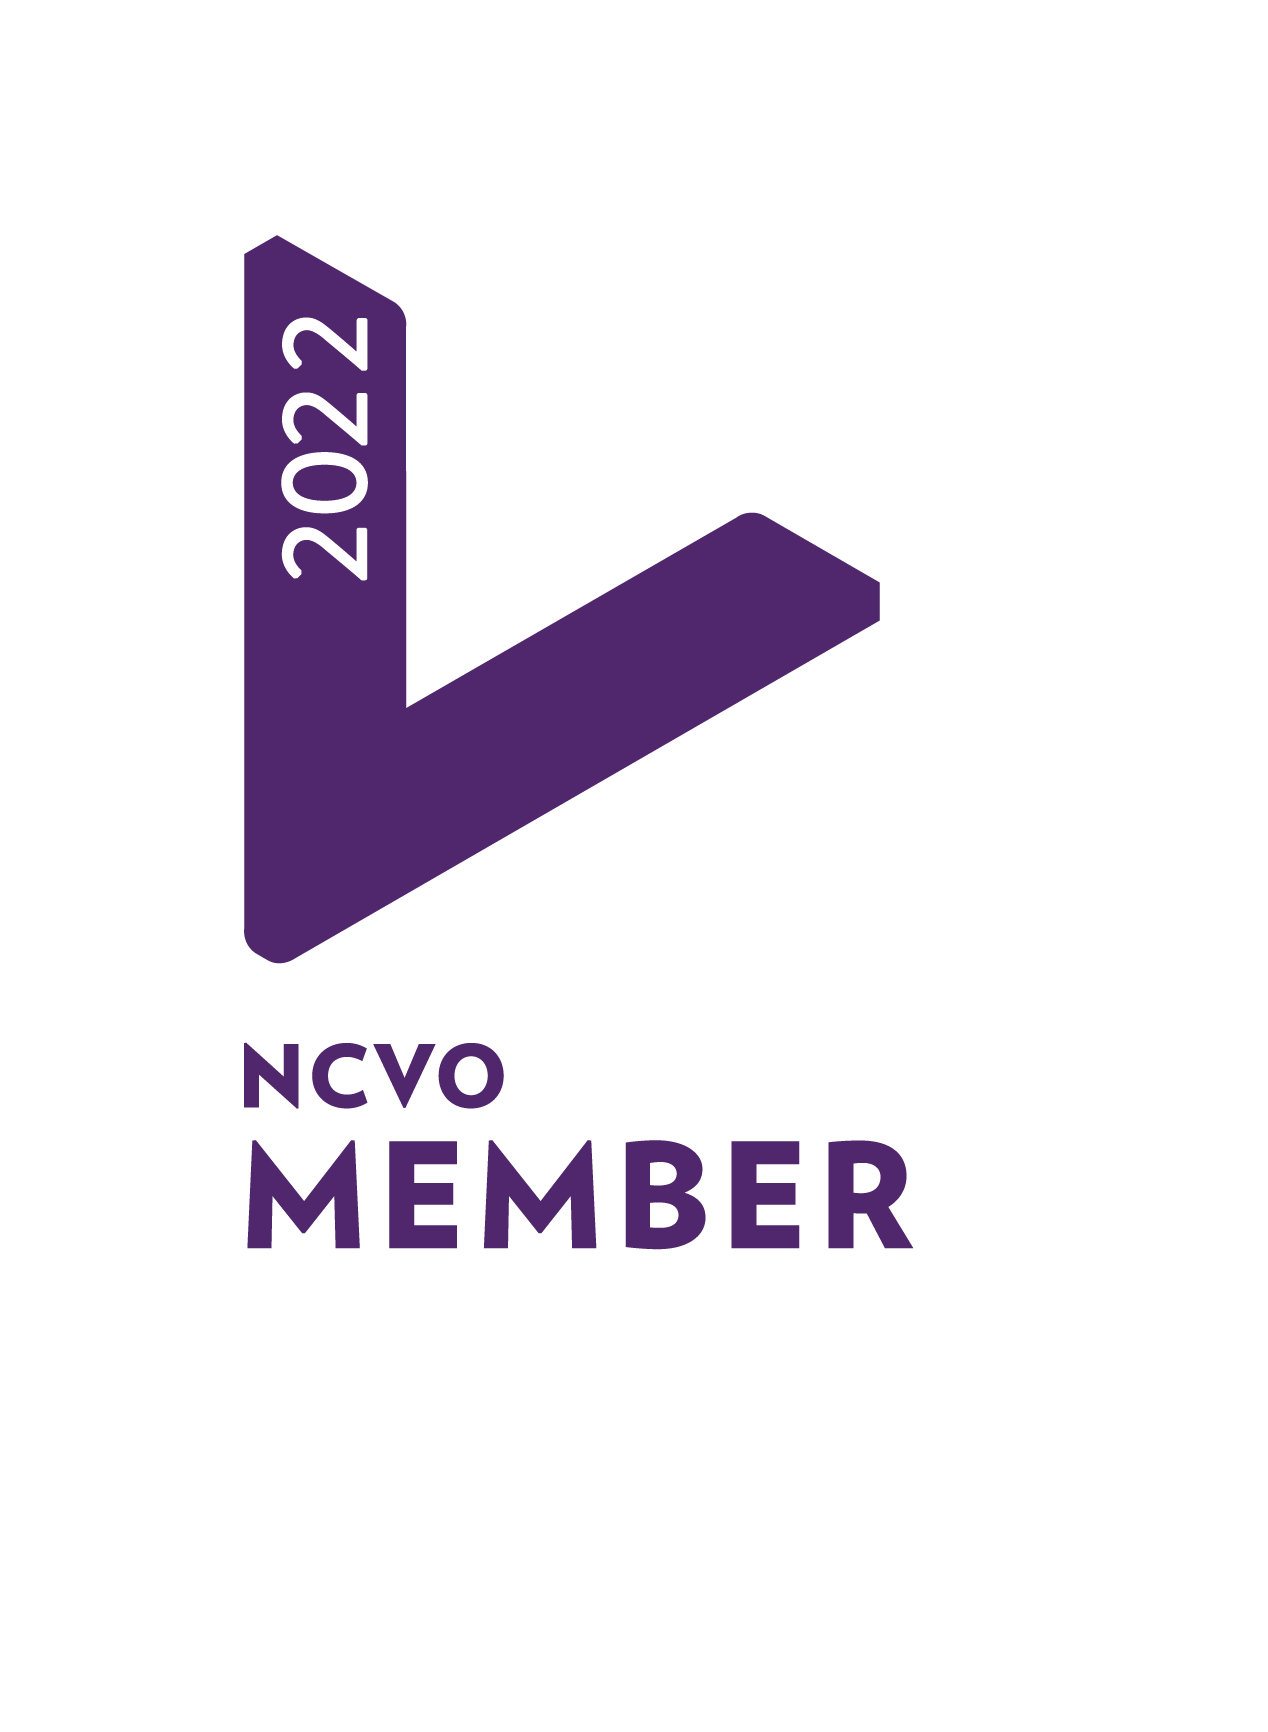 Member of the National Council for Voluntary Organisations